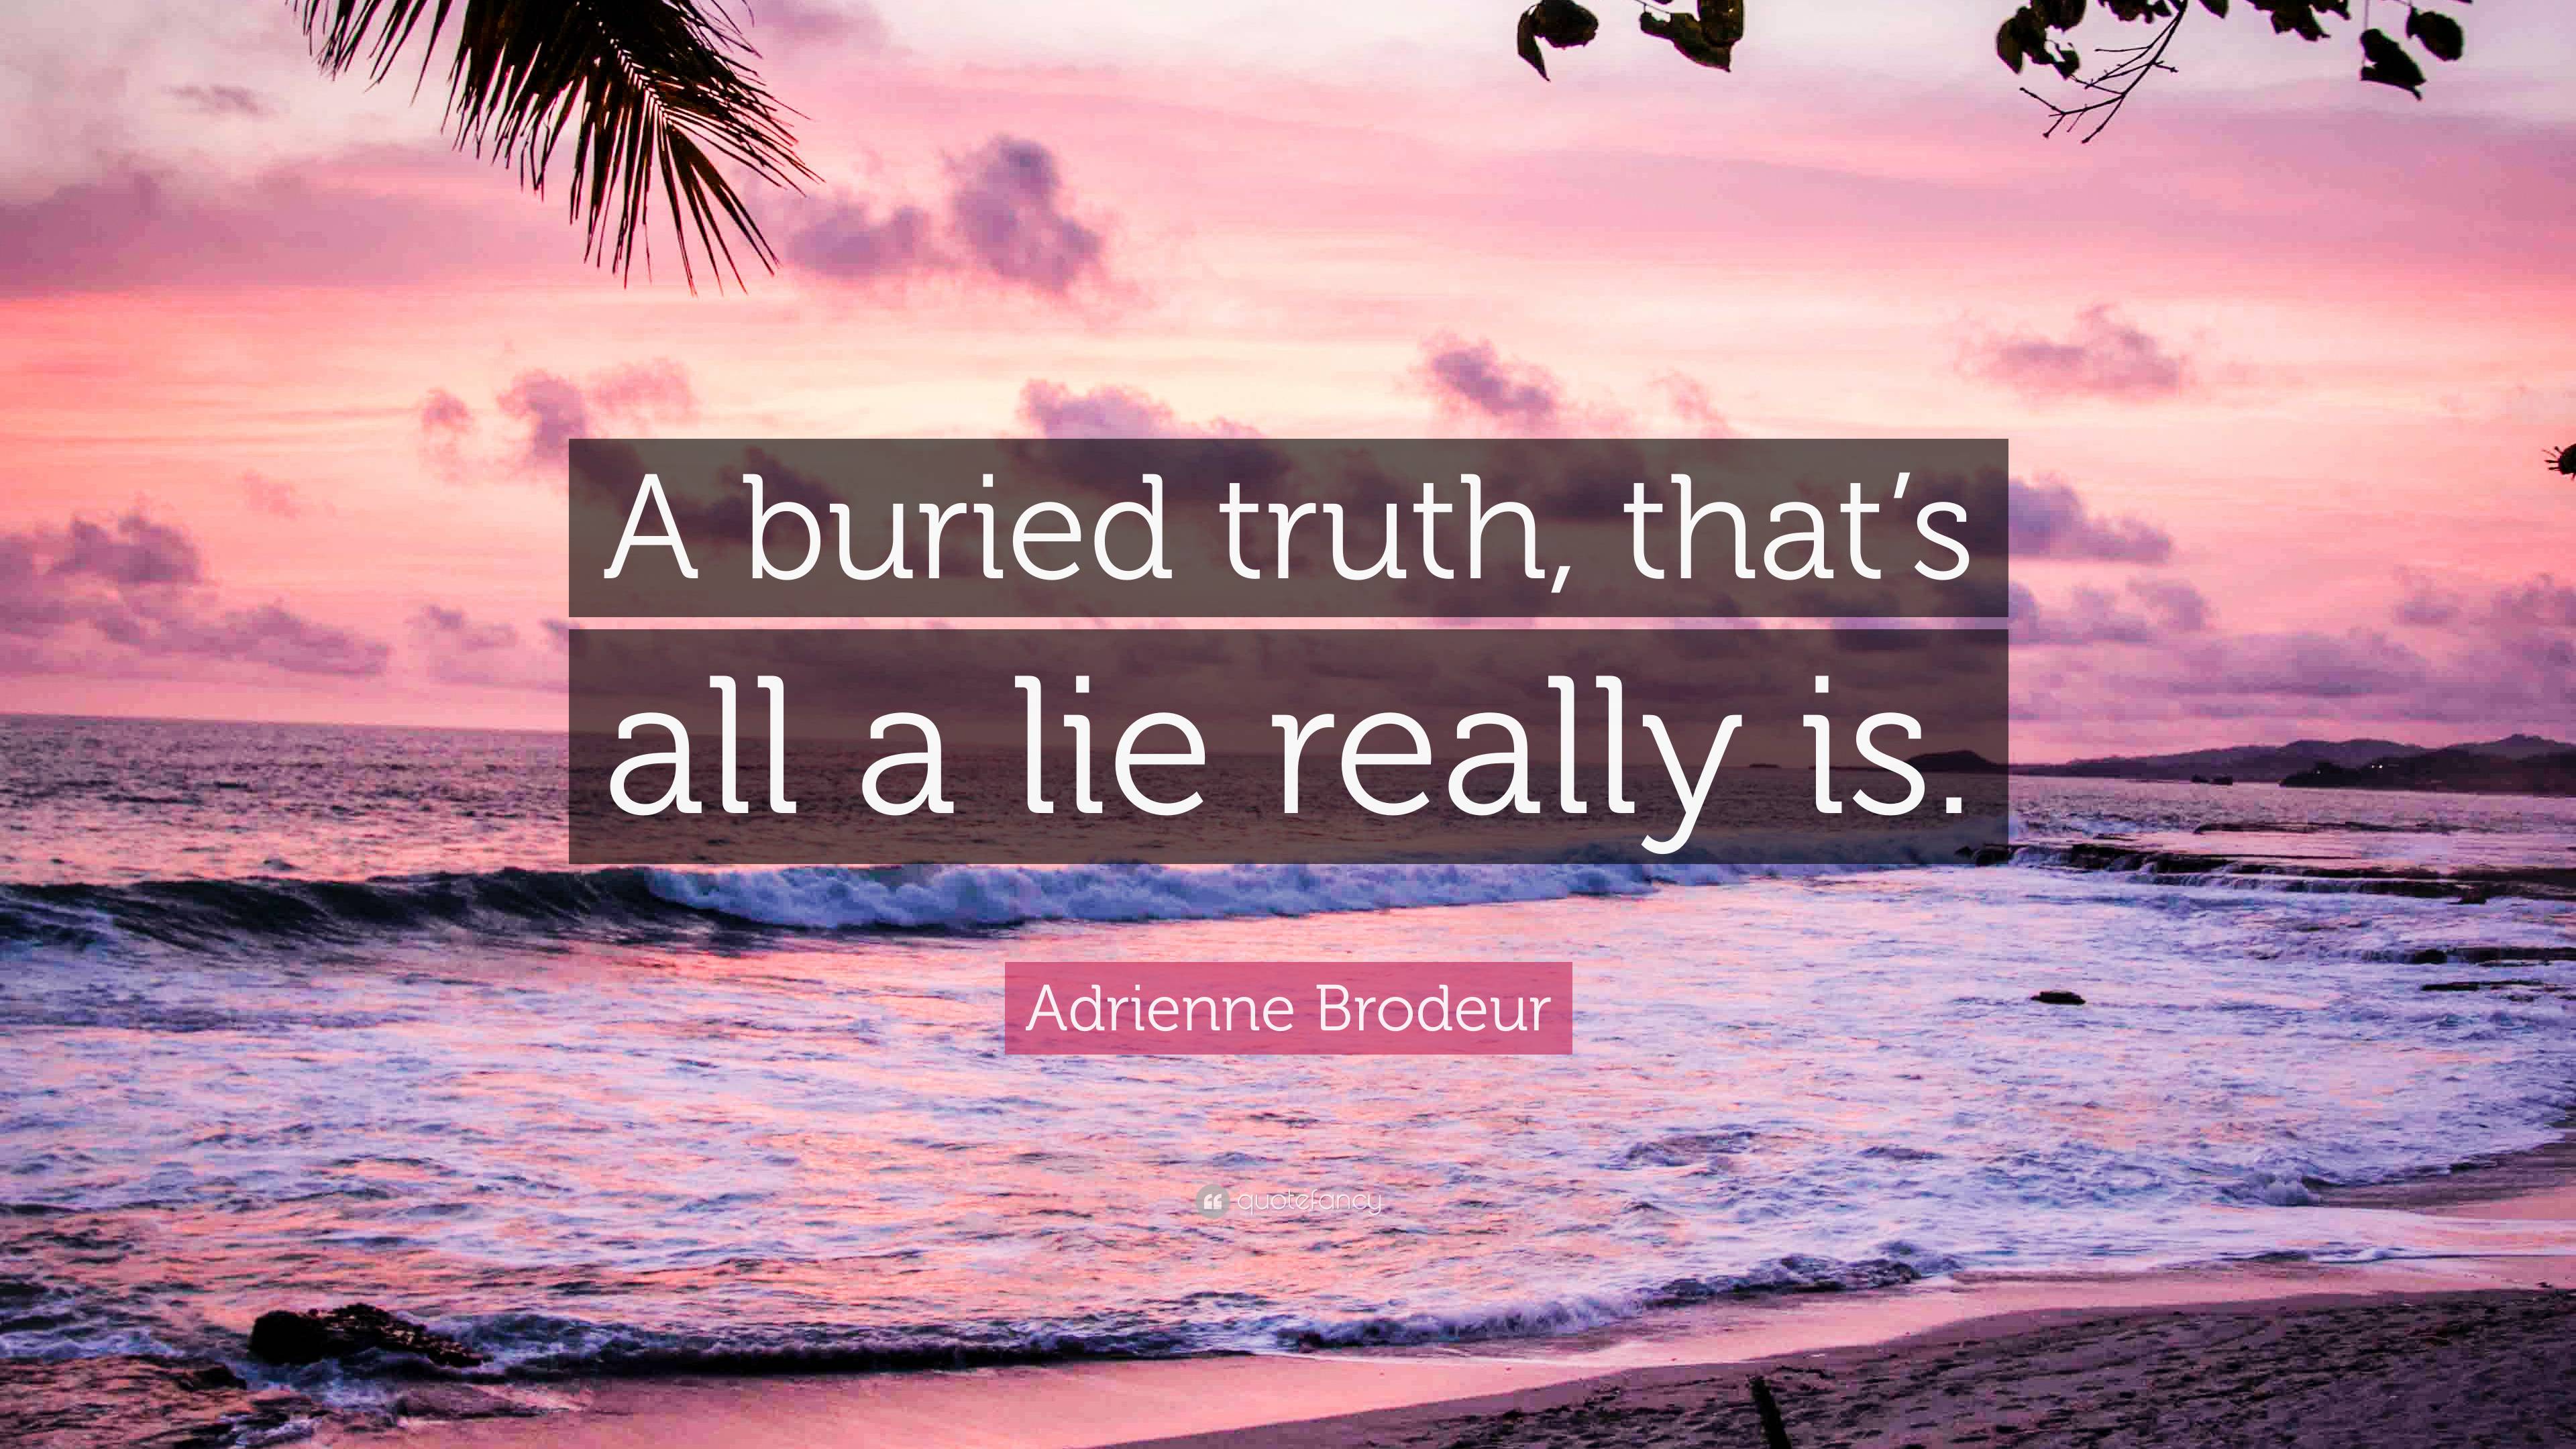 Adrienne Brodeur Quote: “A buried truth, that’s all a lie really is.”